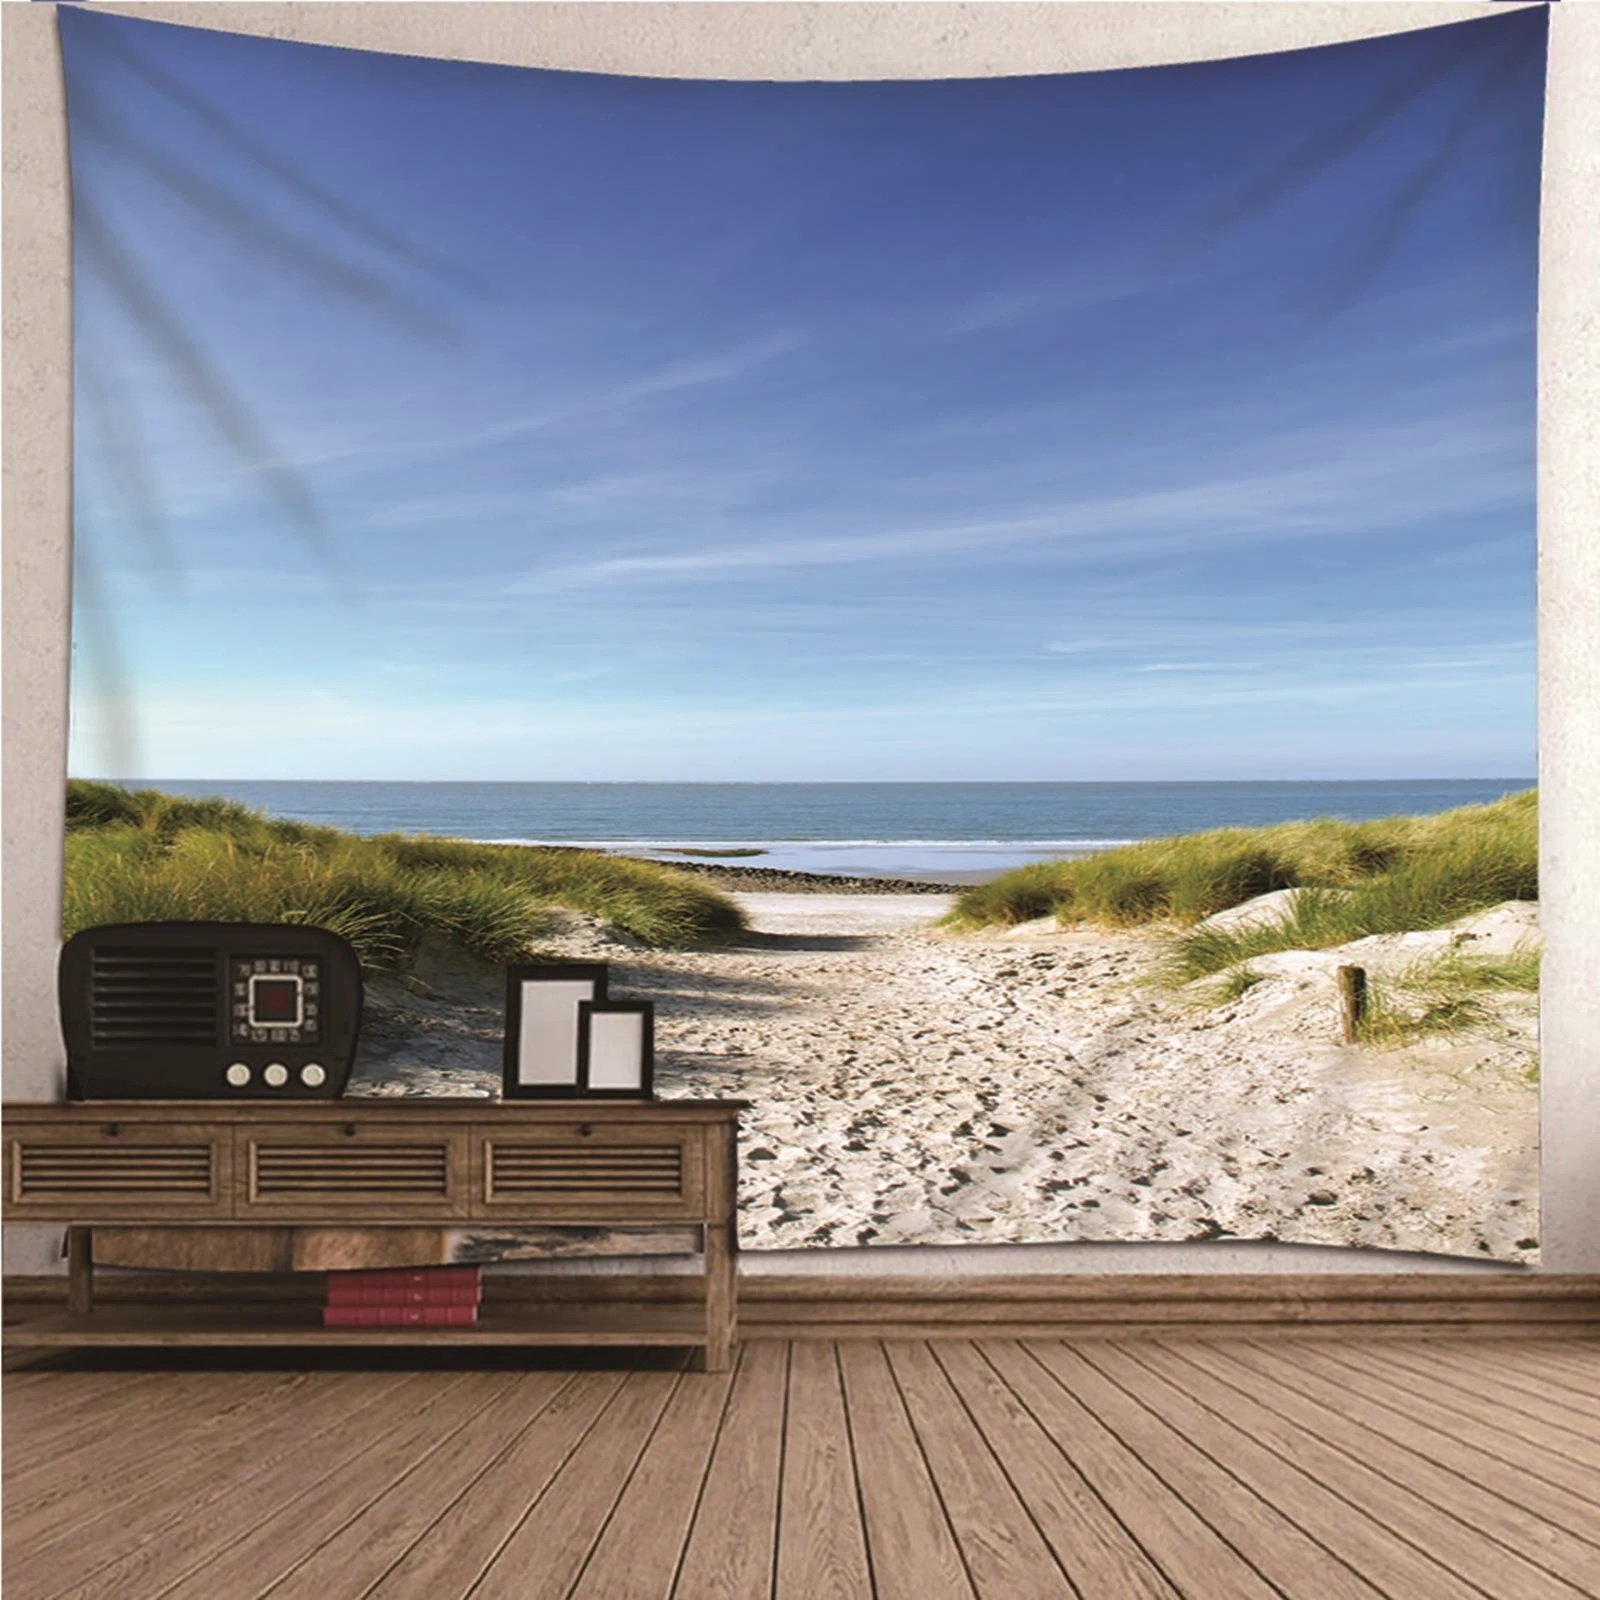 

Tapestry Curtains Wall Tapestry Painting natural scenery Sky Ocean Beach Wall Hanging Blanket Dorm Art Decor Covering